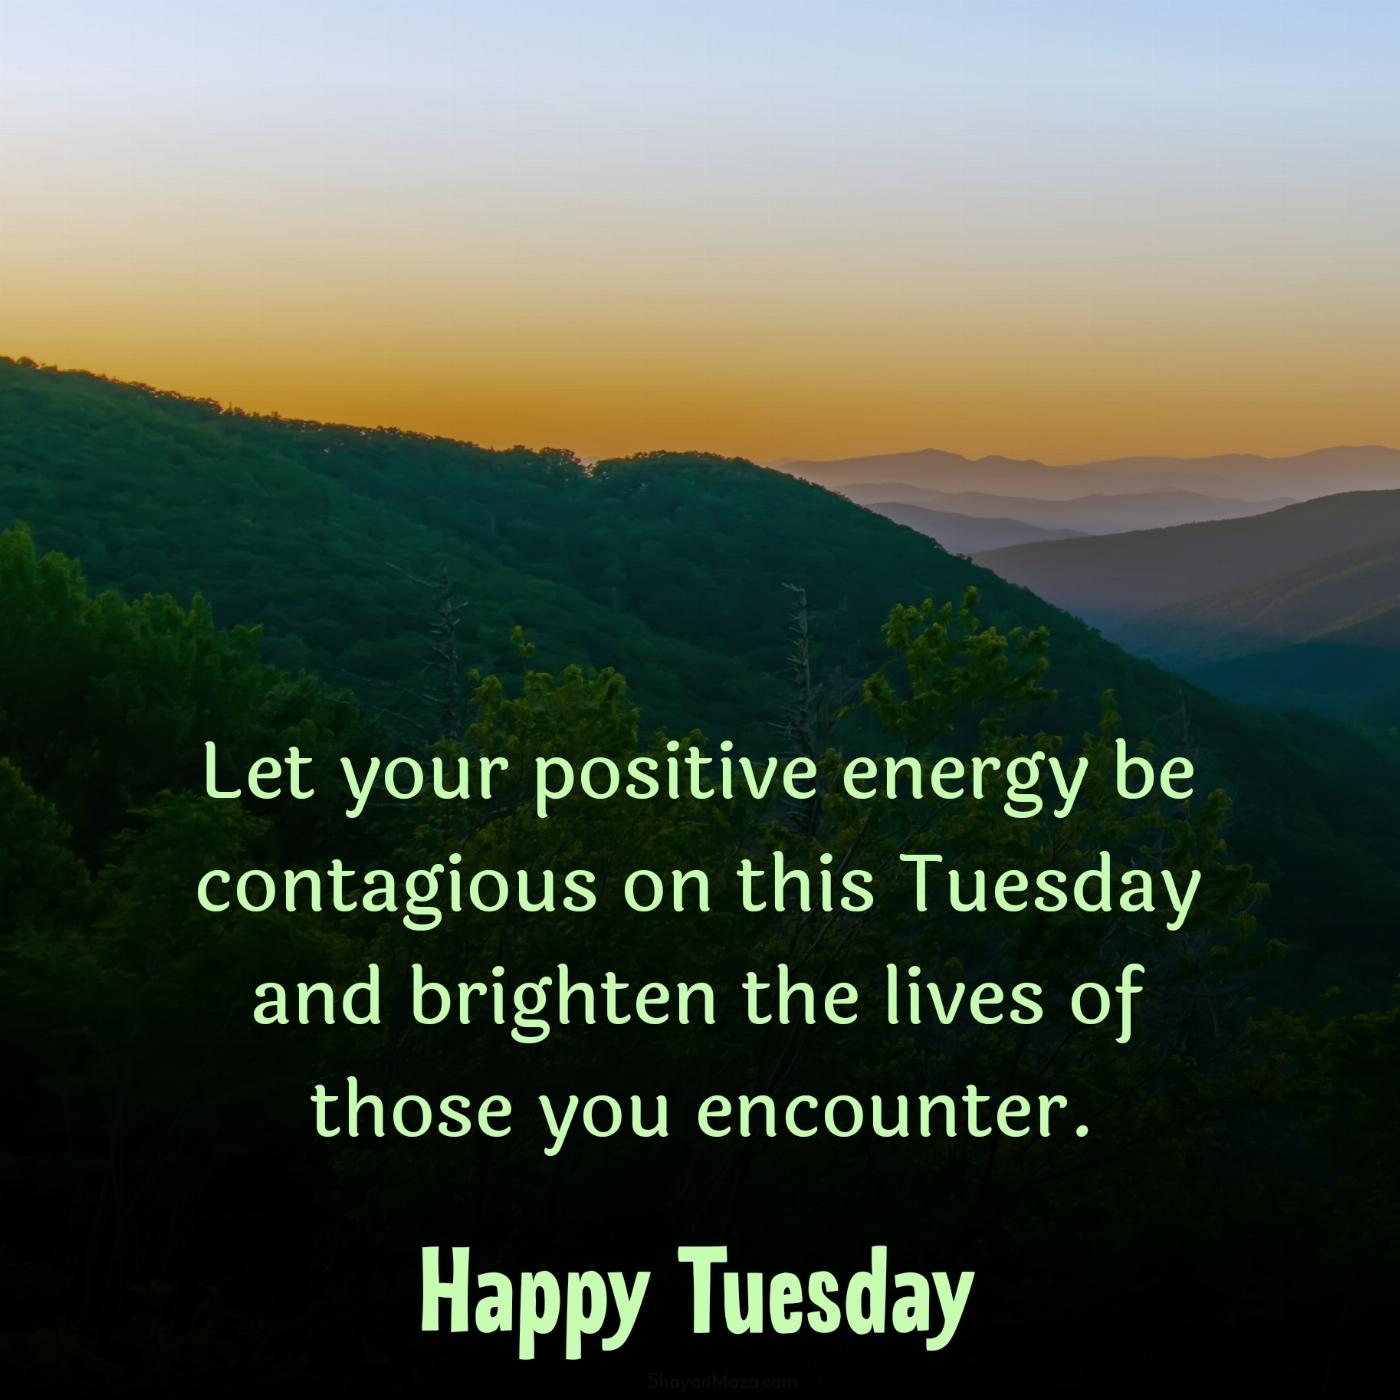 Let your positive energy be contagious on this Tuesday